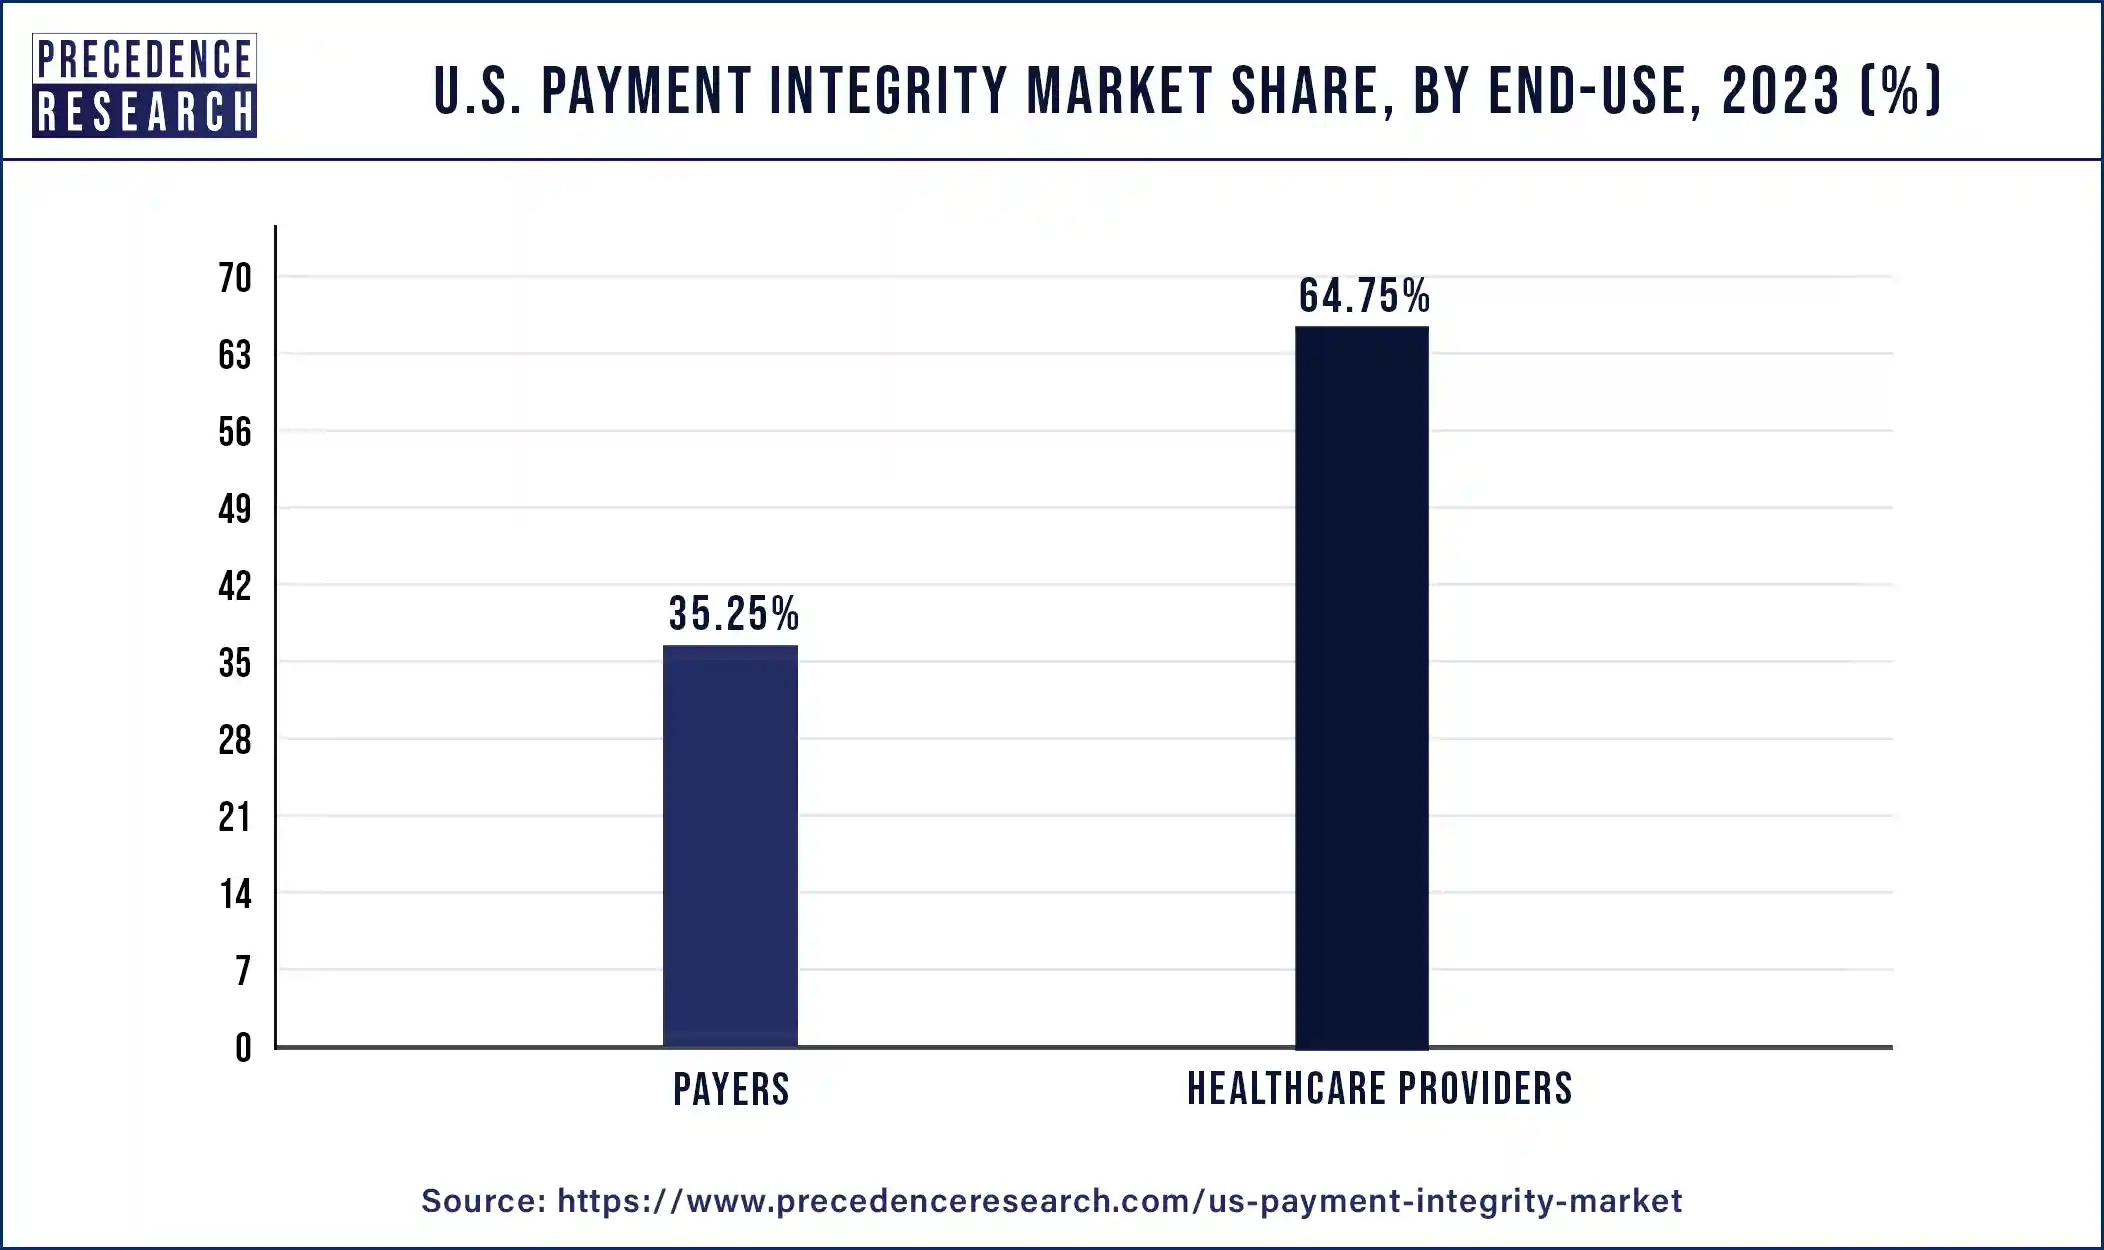 U.S. Payment Integrity Market Share, By End Use, 2023 (%)